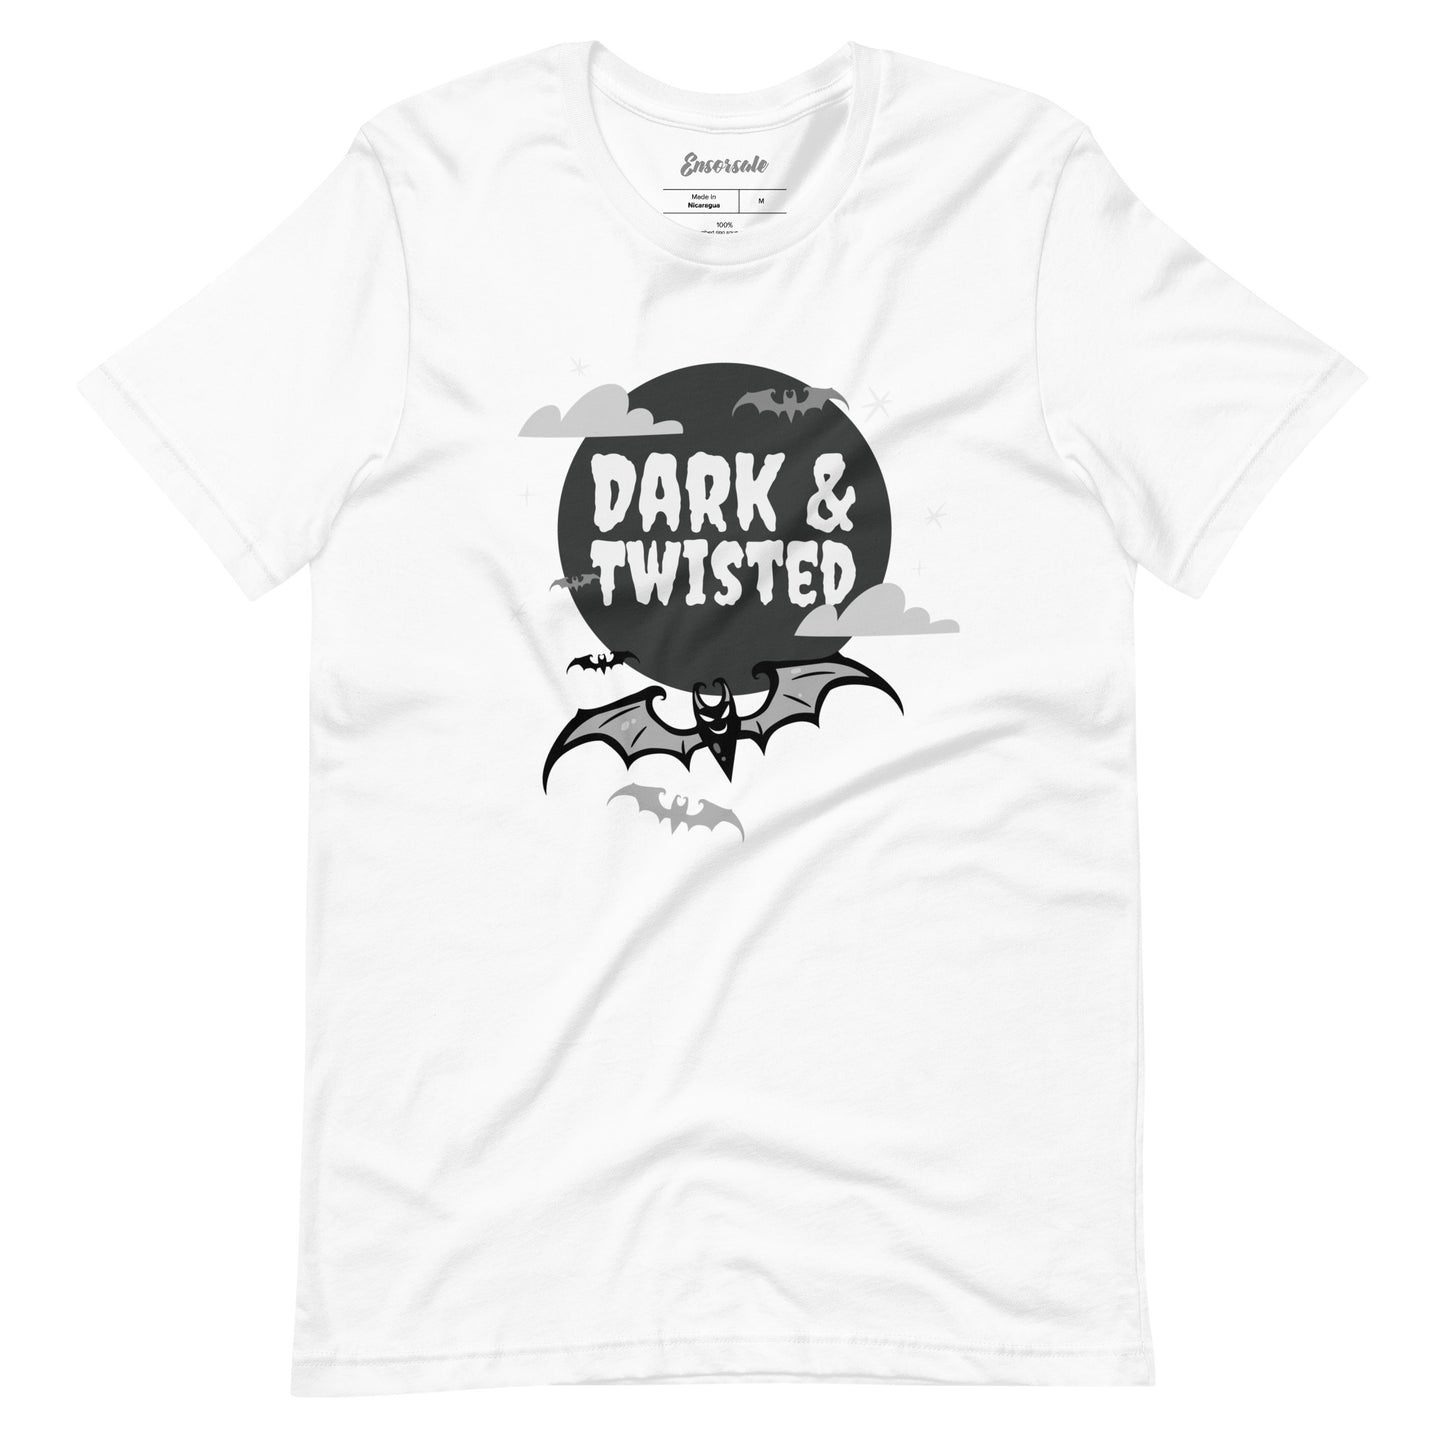 Dark and Twisted t-shirt